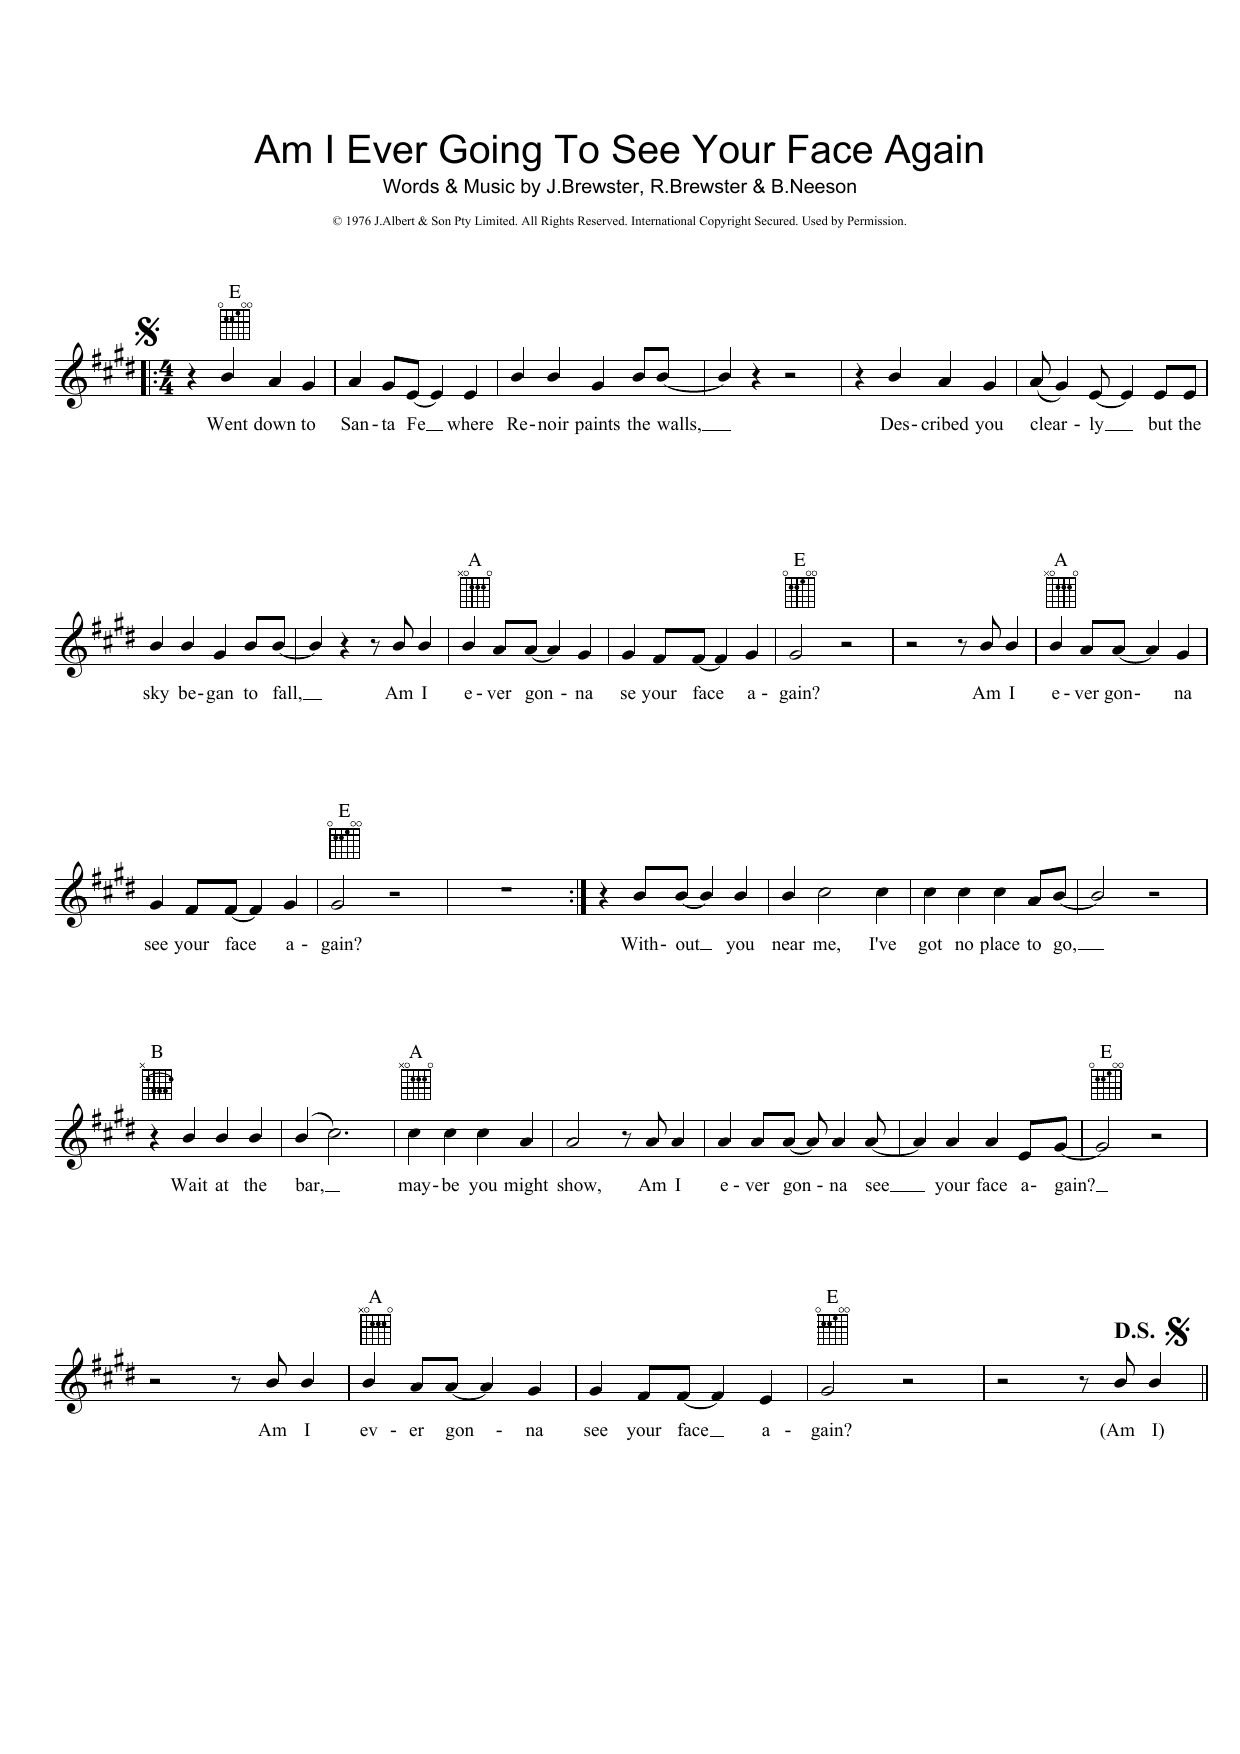 Download The Radiators Am I Ever Going To See Your Face Again Sheet Music